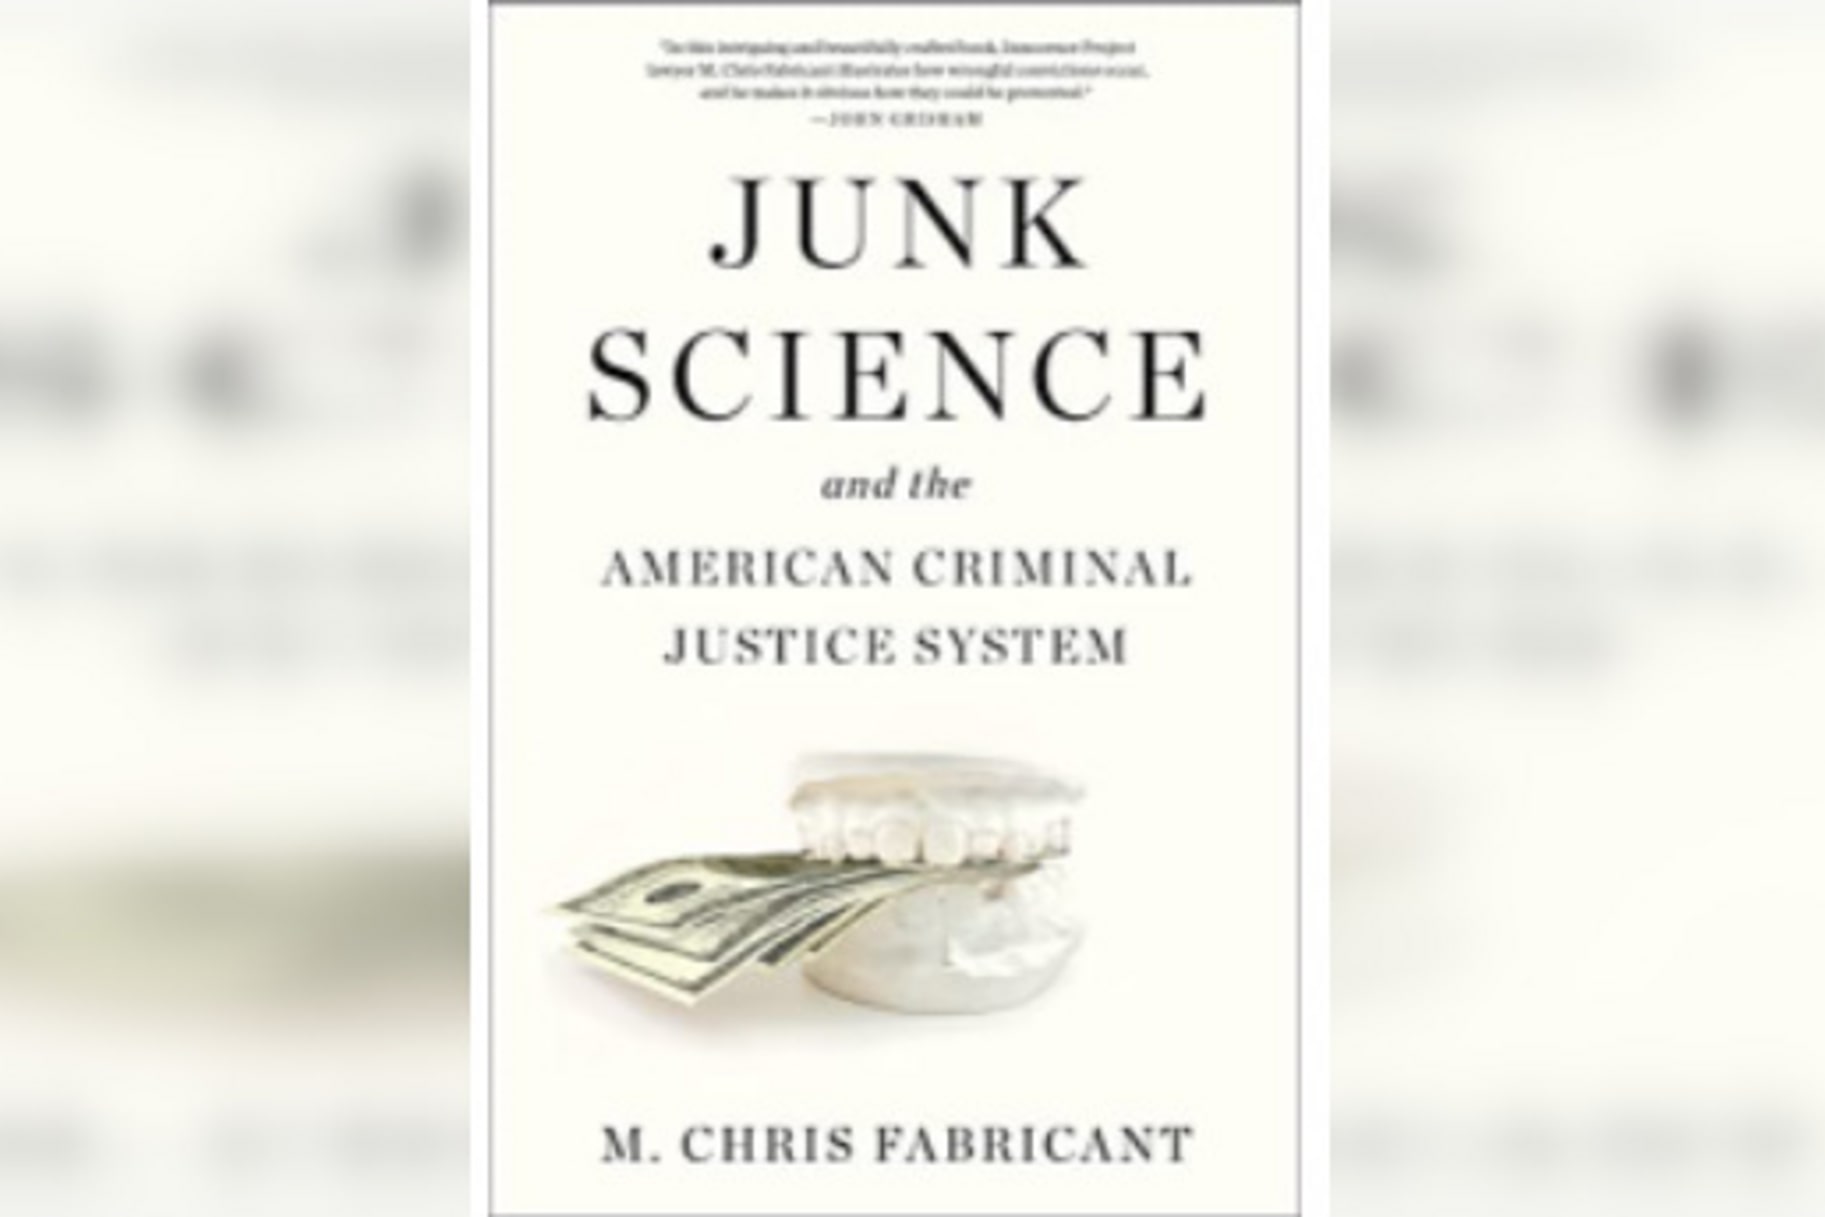 M. Chris Fabricant's "Junk Science"